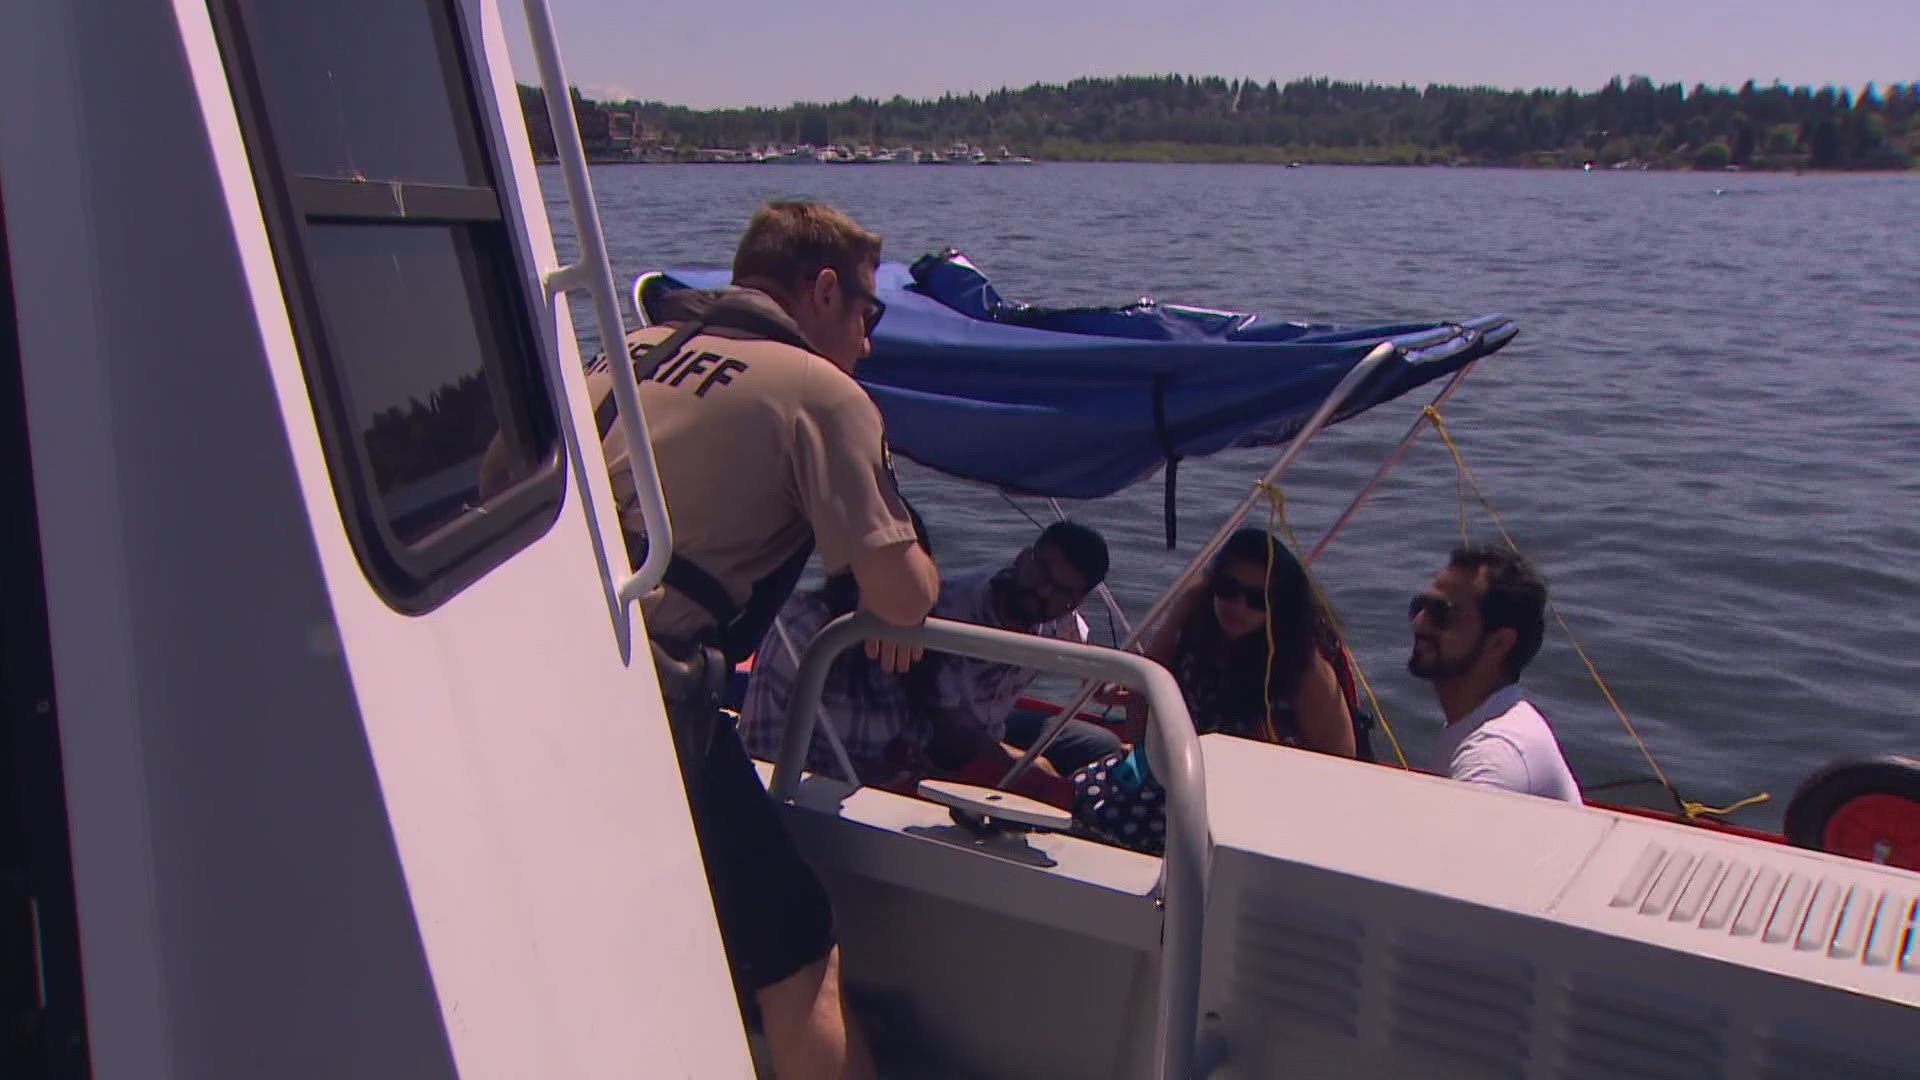 Deputies push education as they note a number of new boat and paddleboard users hitting the water.